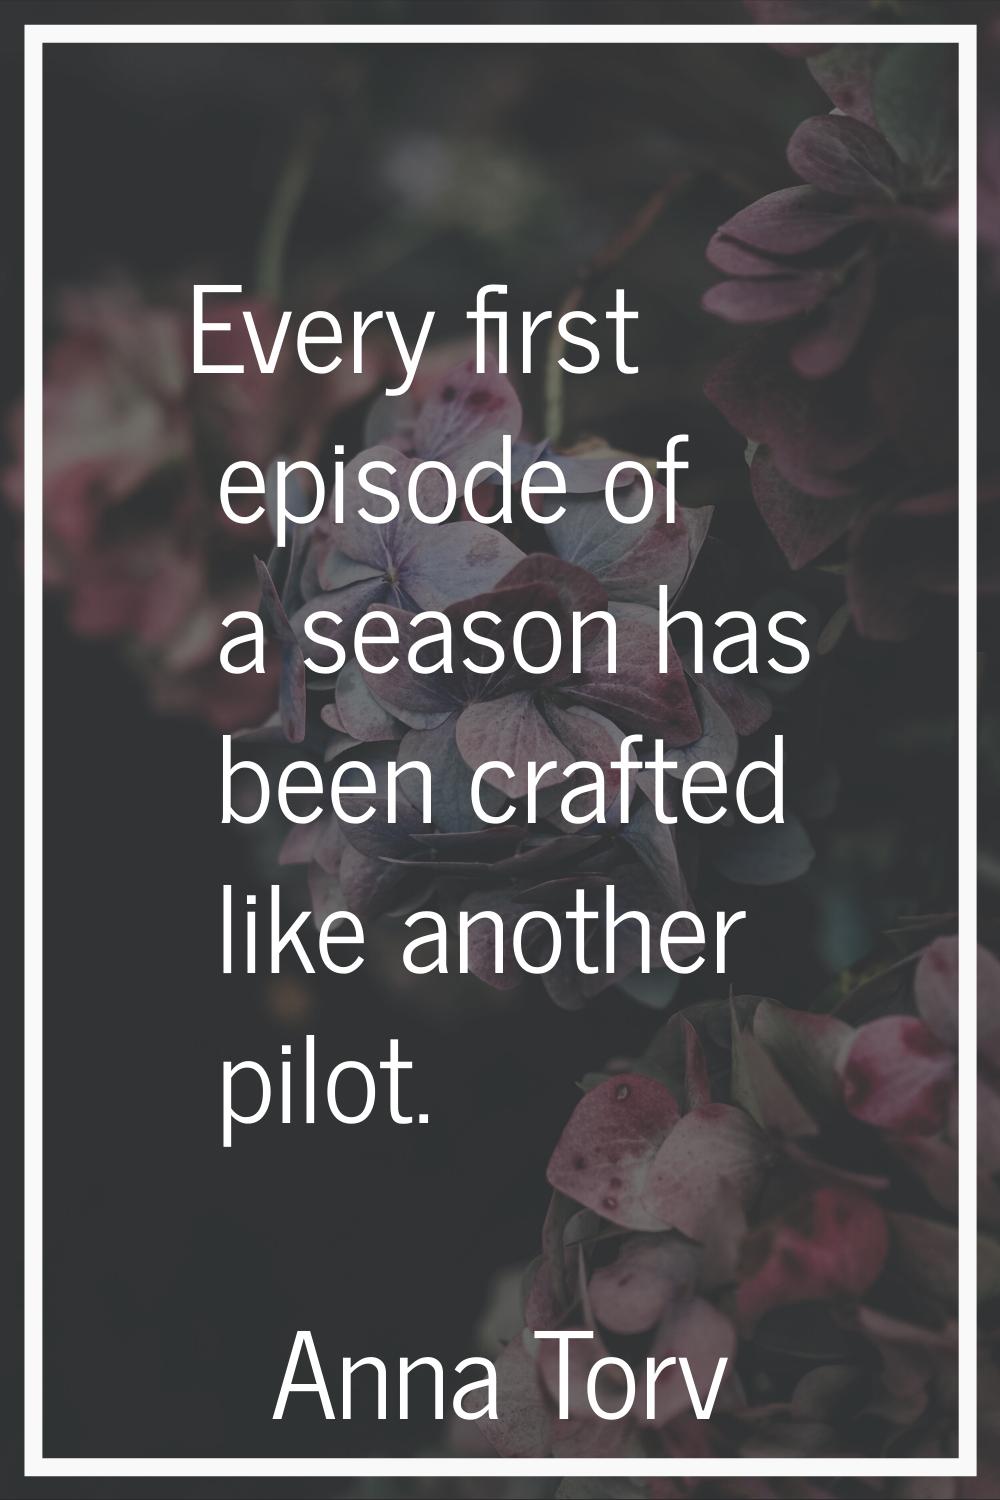 Every first episode of a season has been crafted like another pilot.